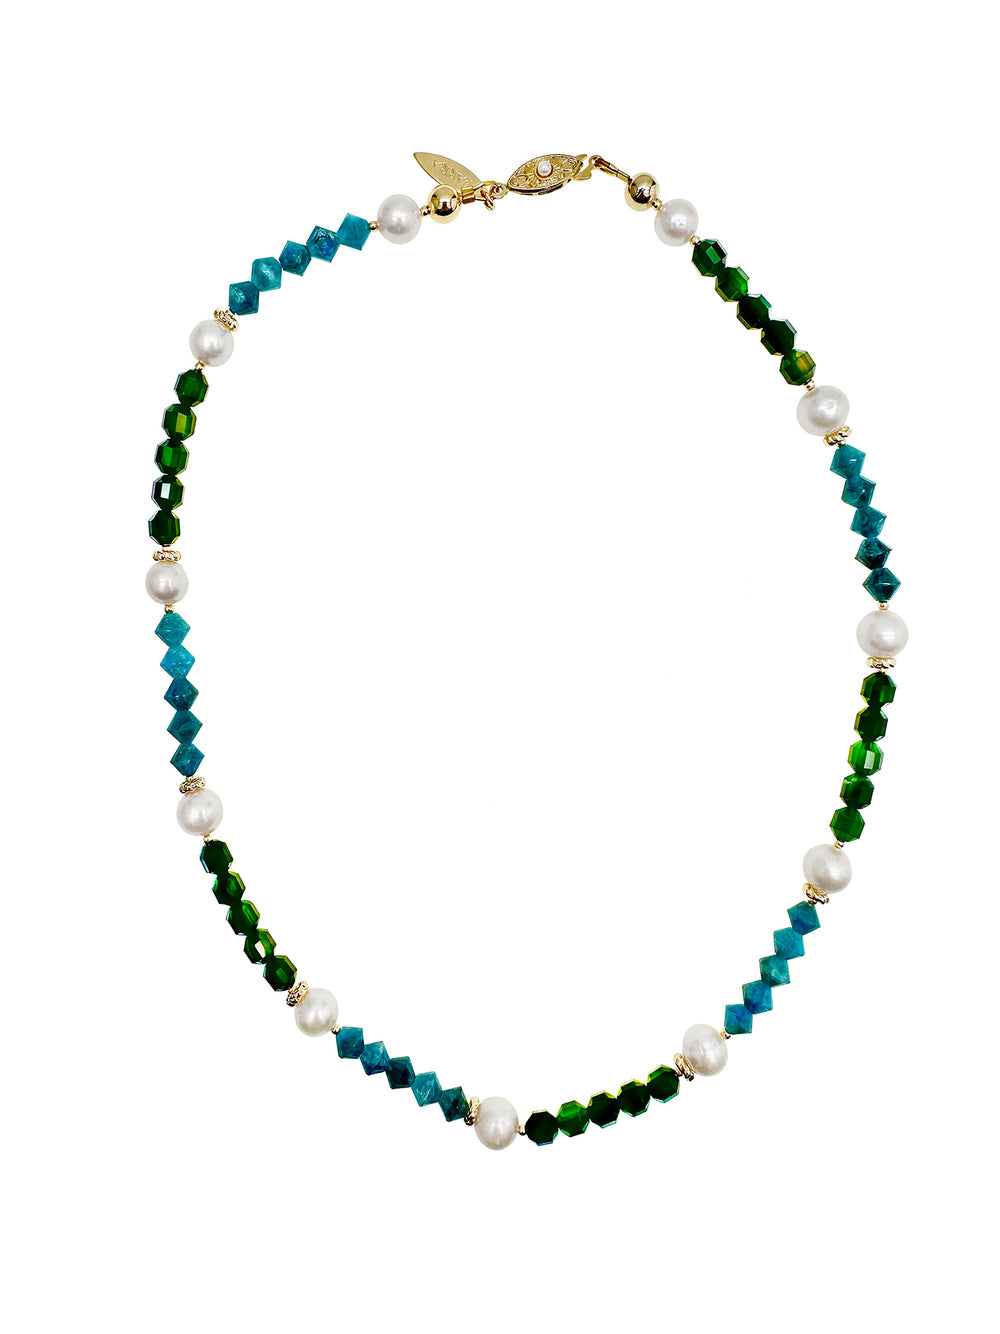 Apatite With Agate and Freshwater Pearls Short Necklace KN012 - FARRA